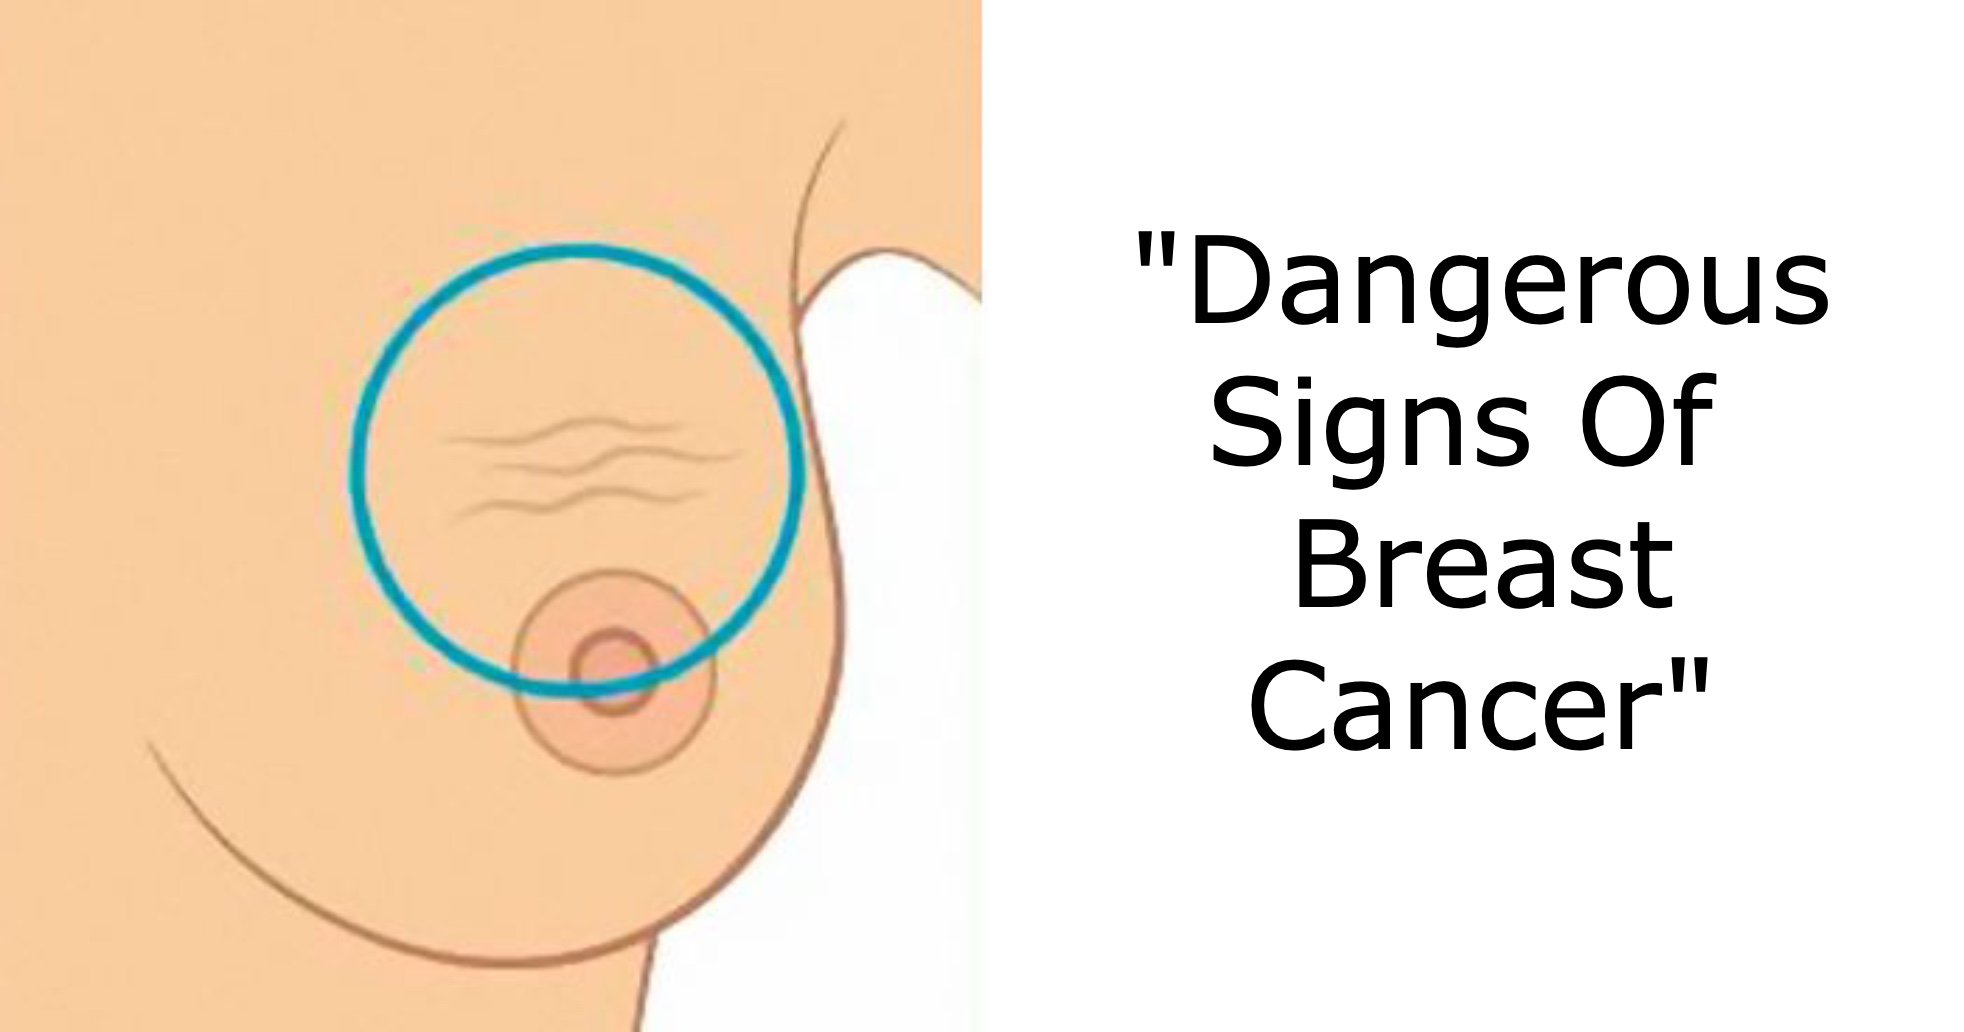 breast cane.jpg?resize=412,275 - 9 Common Warning Signs Of Breast Cancer That People Often Ignore